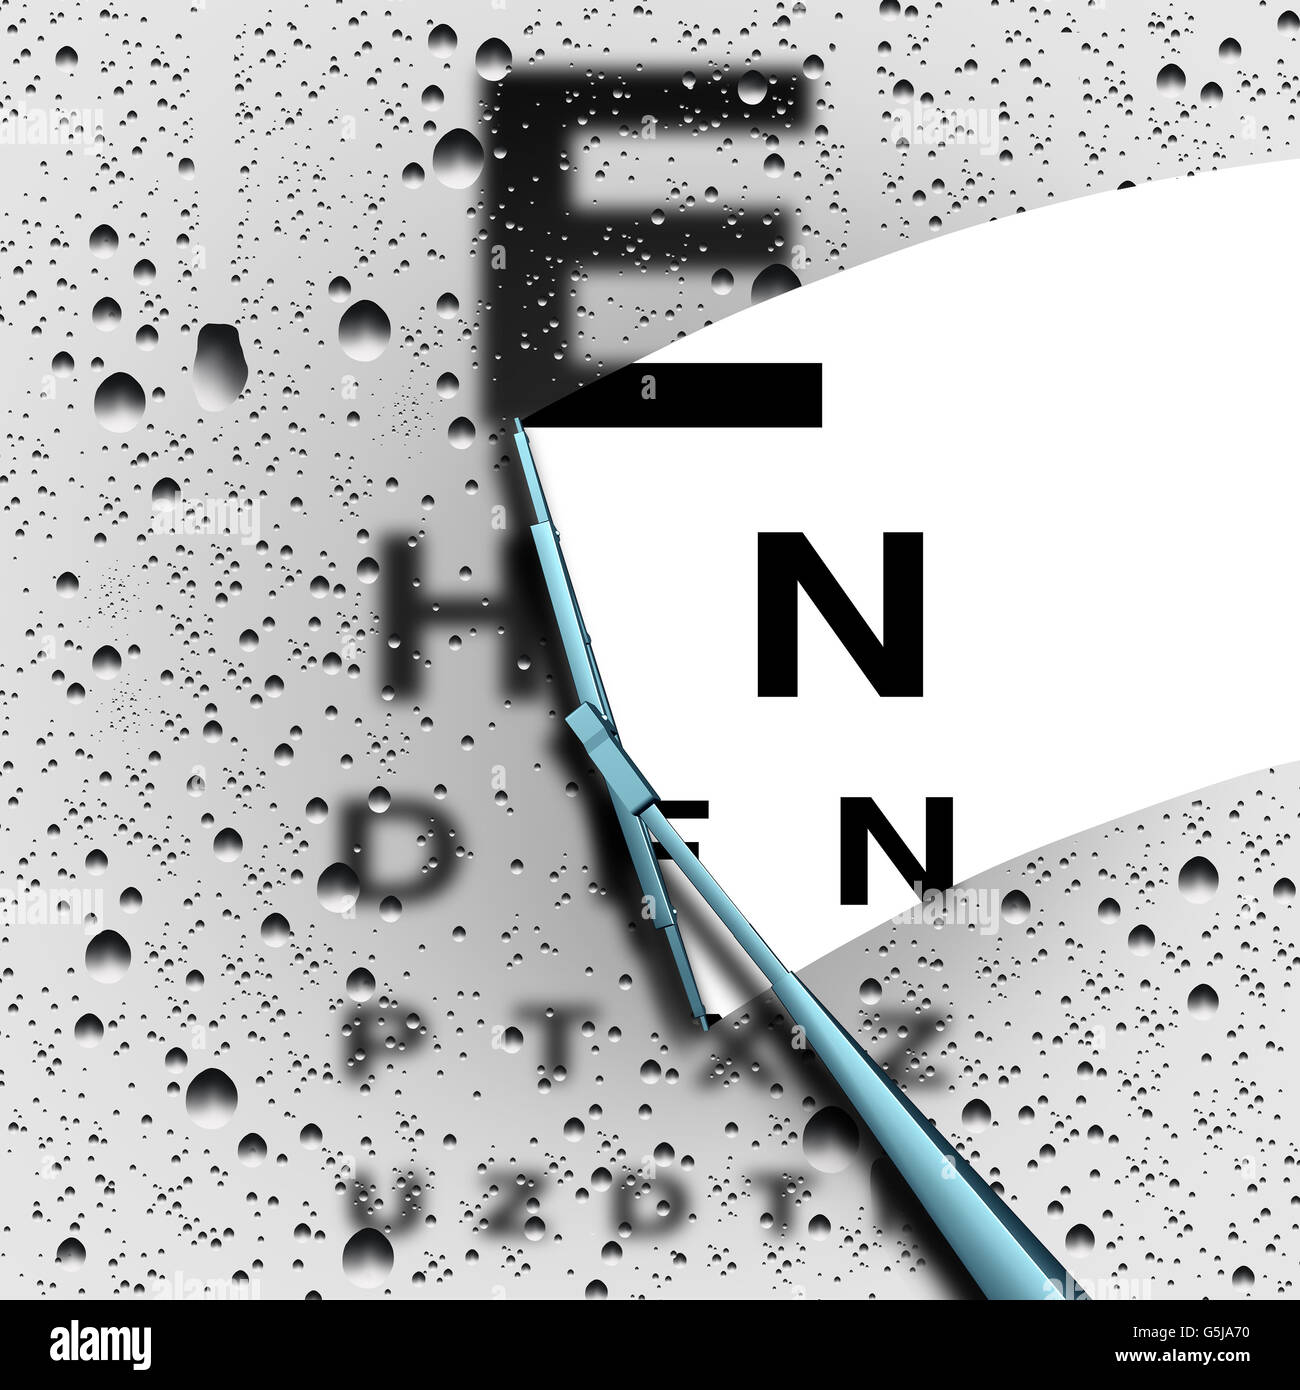 Clear vision out of focus eye test concept as a blurry eye chart with a wiper wiping away water drops for a sharper visual as a Stock Photo